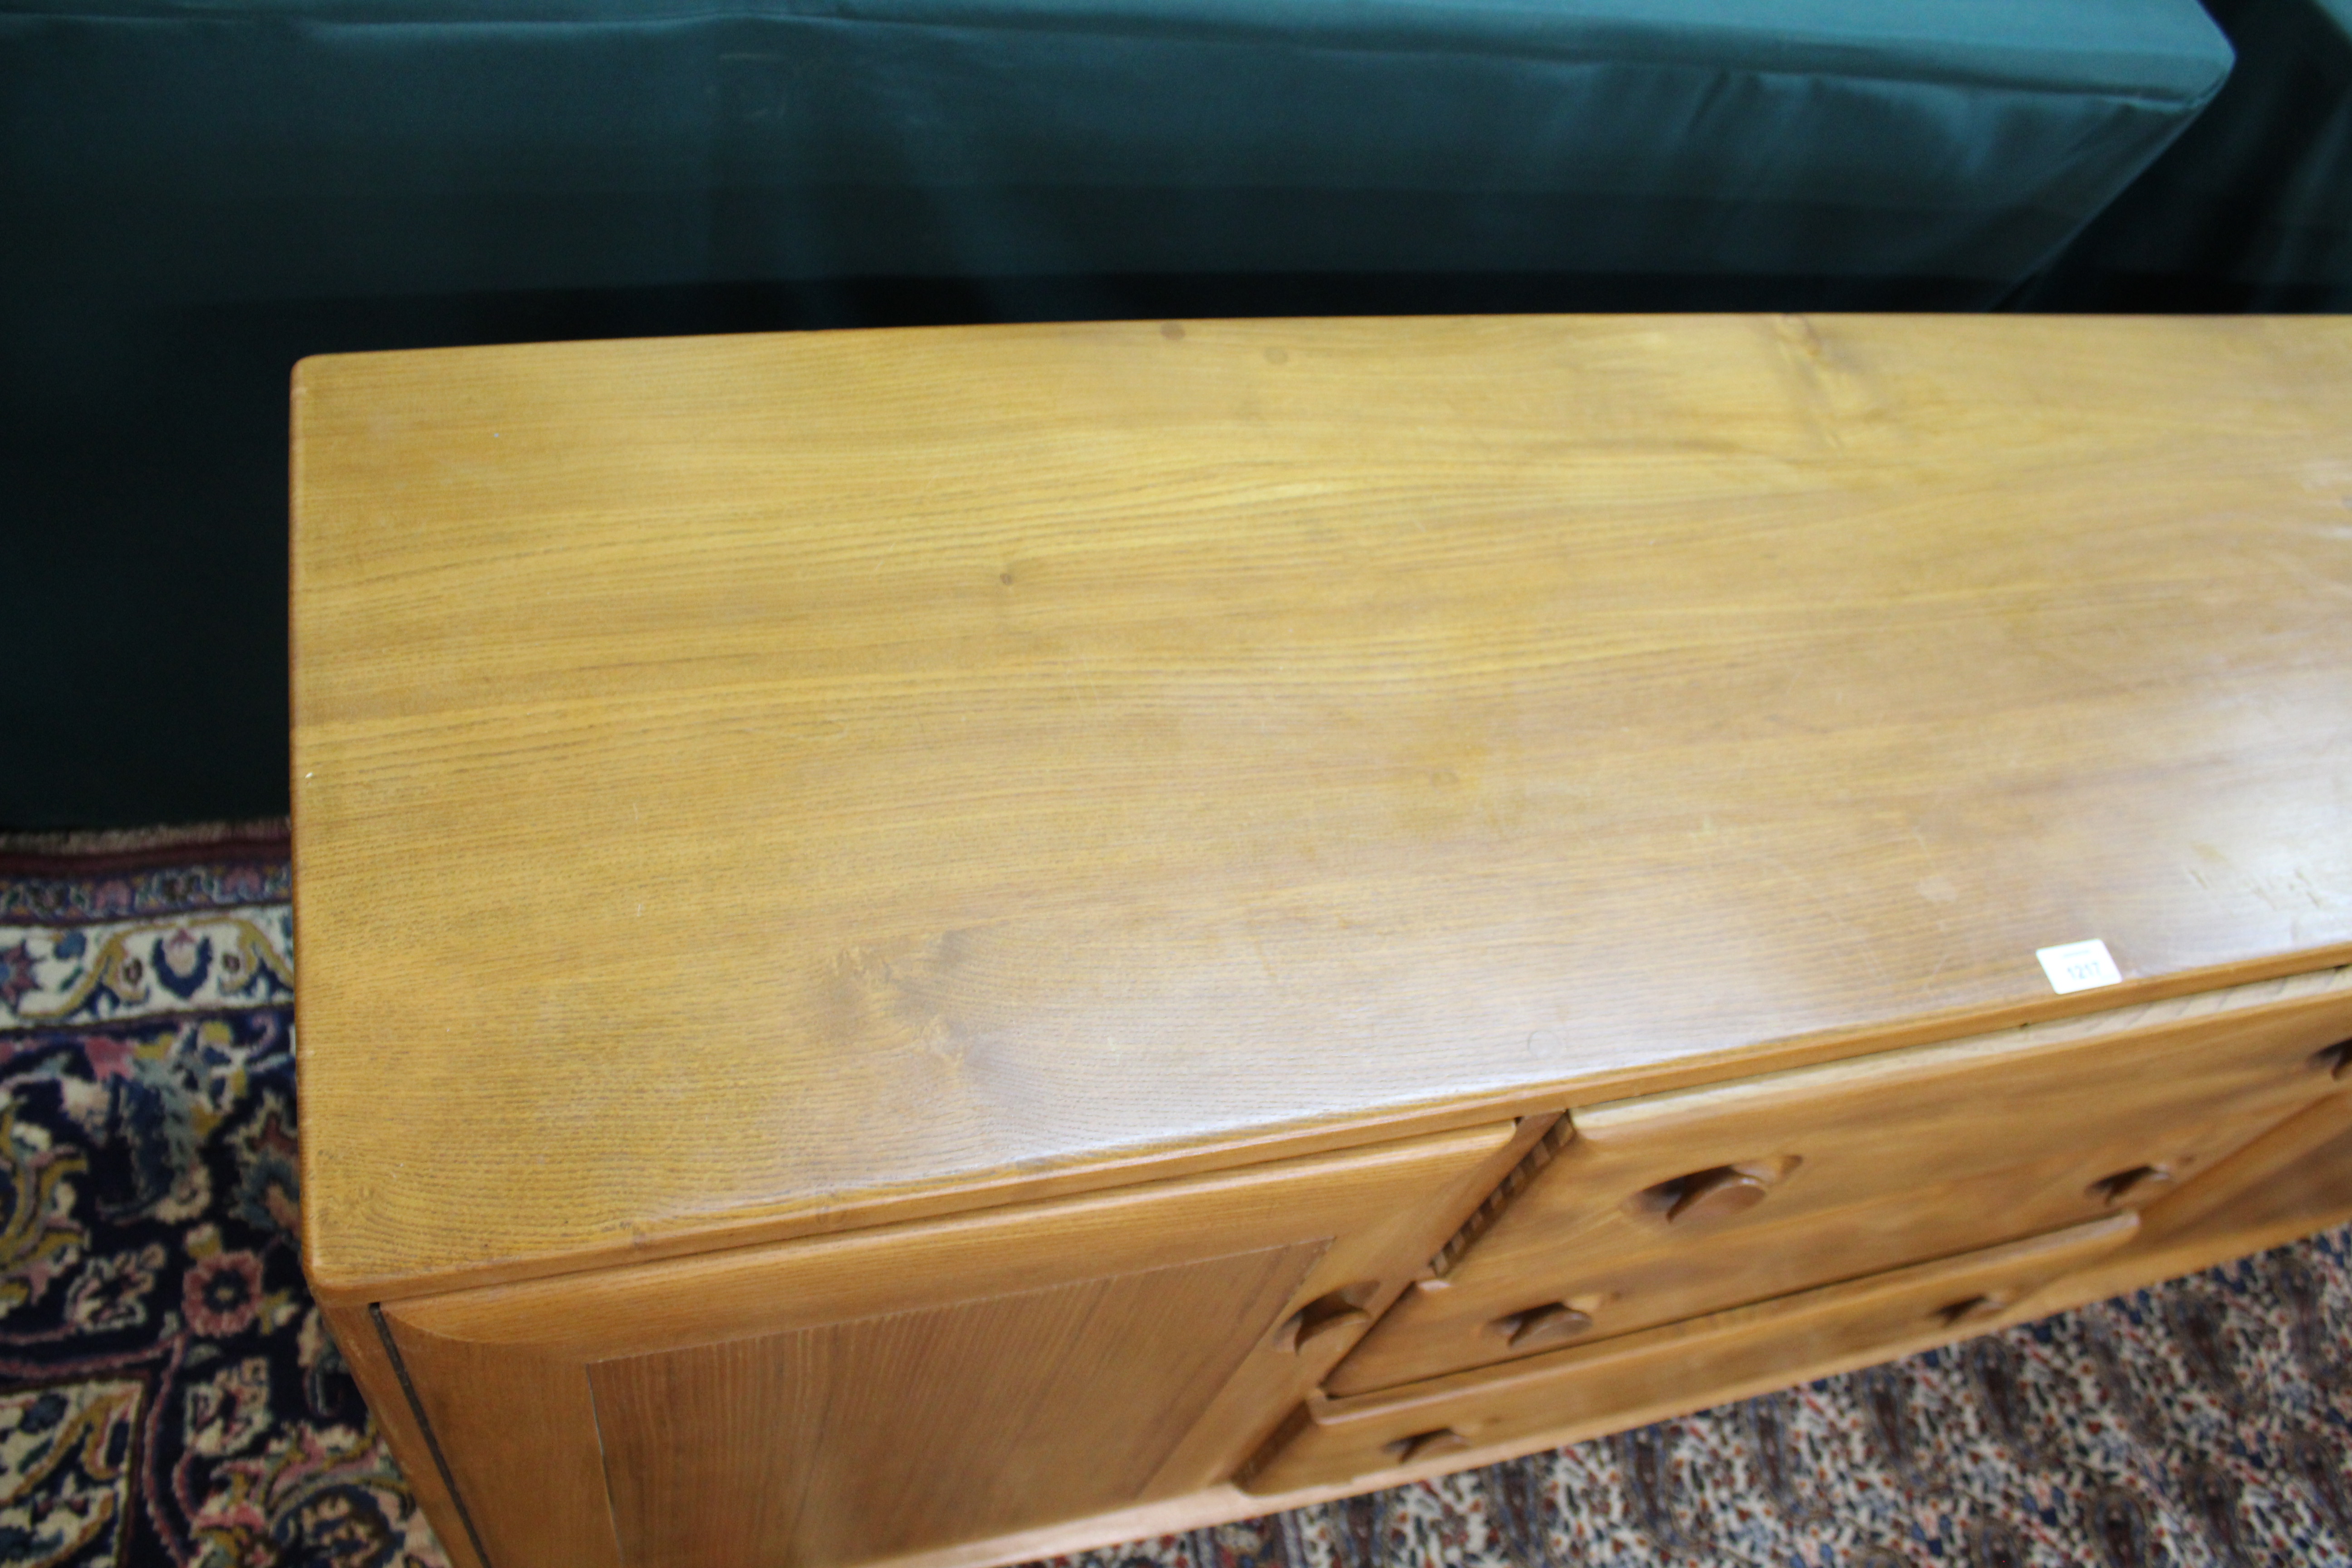 ERCOL SIDEBOARD a large light elm sideboard with 3 central drawers (1 for cutlery) and flanked by - Image 4 of 9